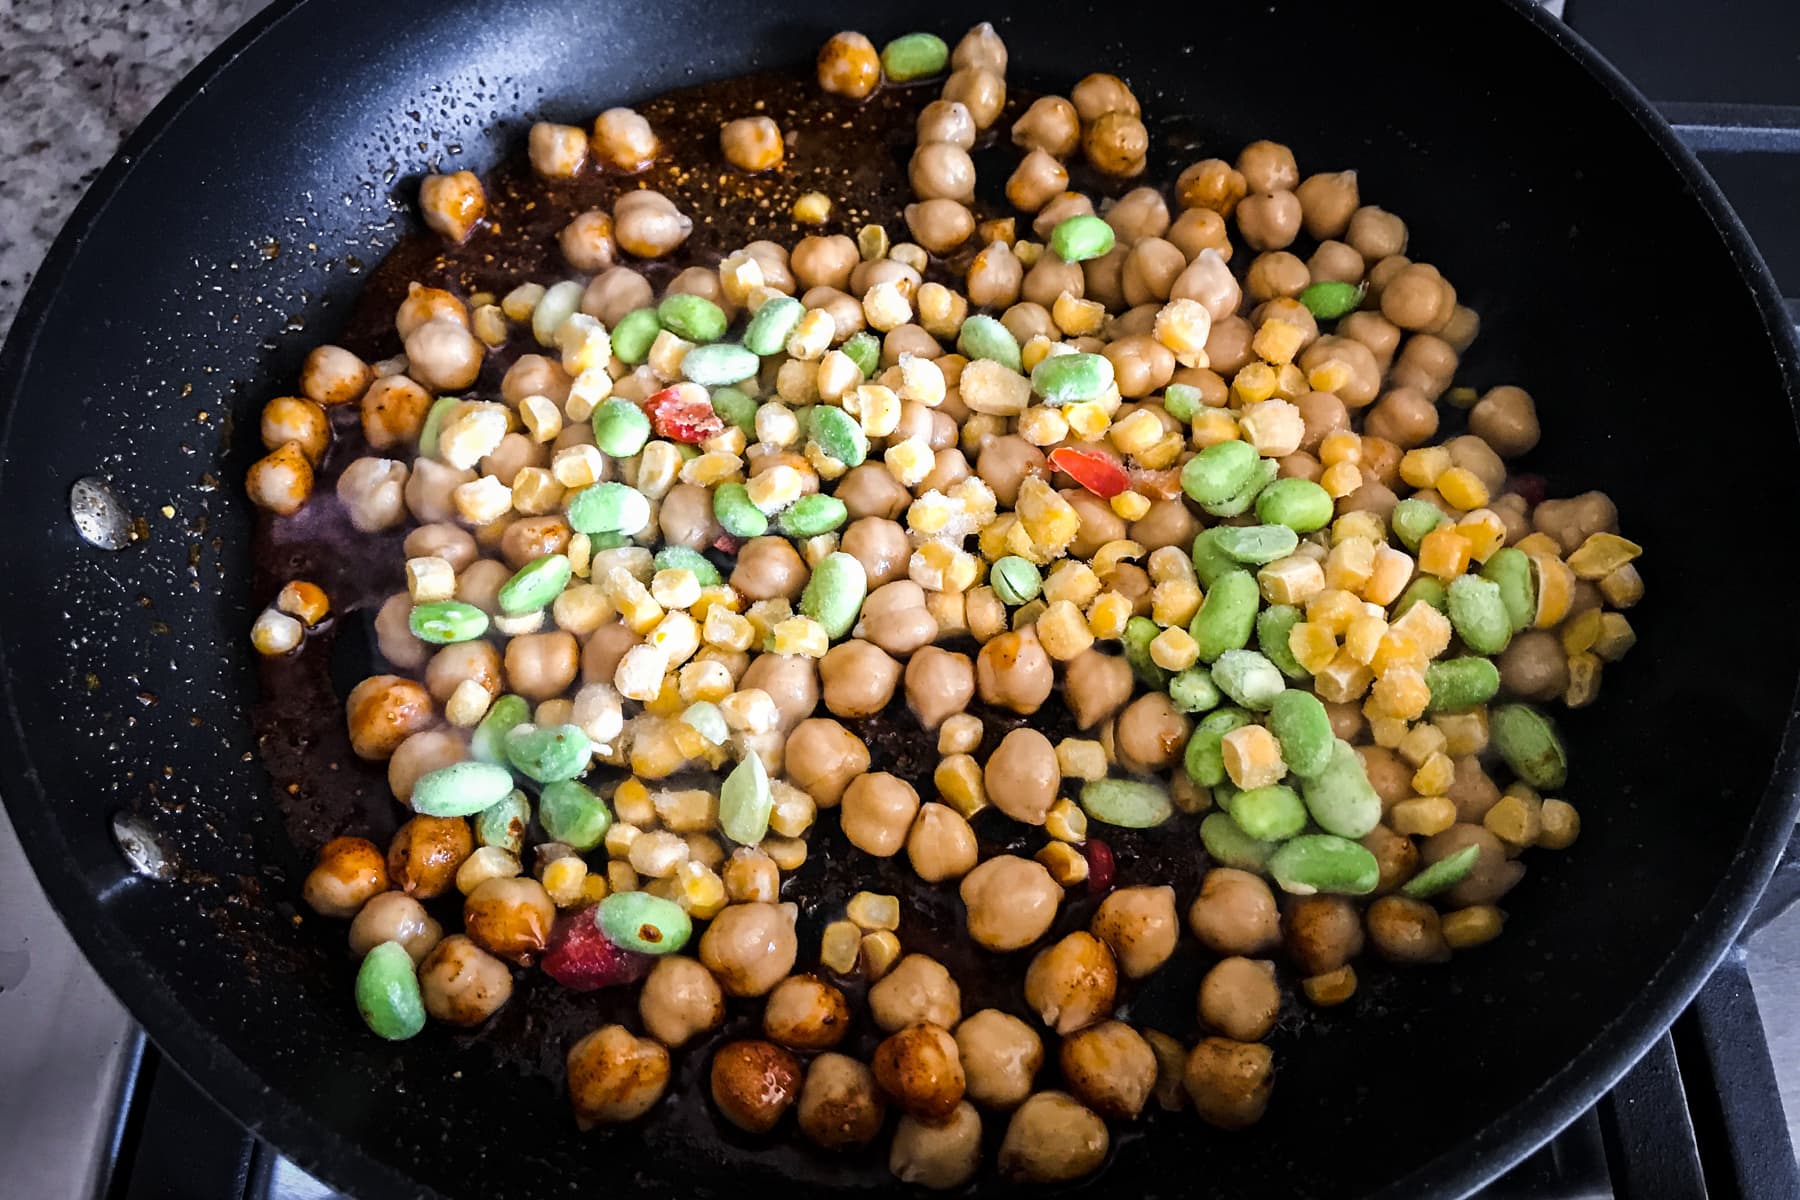 Frozen soycutash mix along with chickpeas in pan